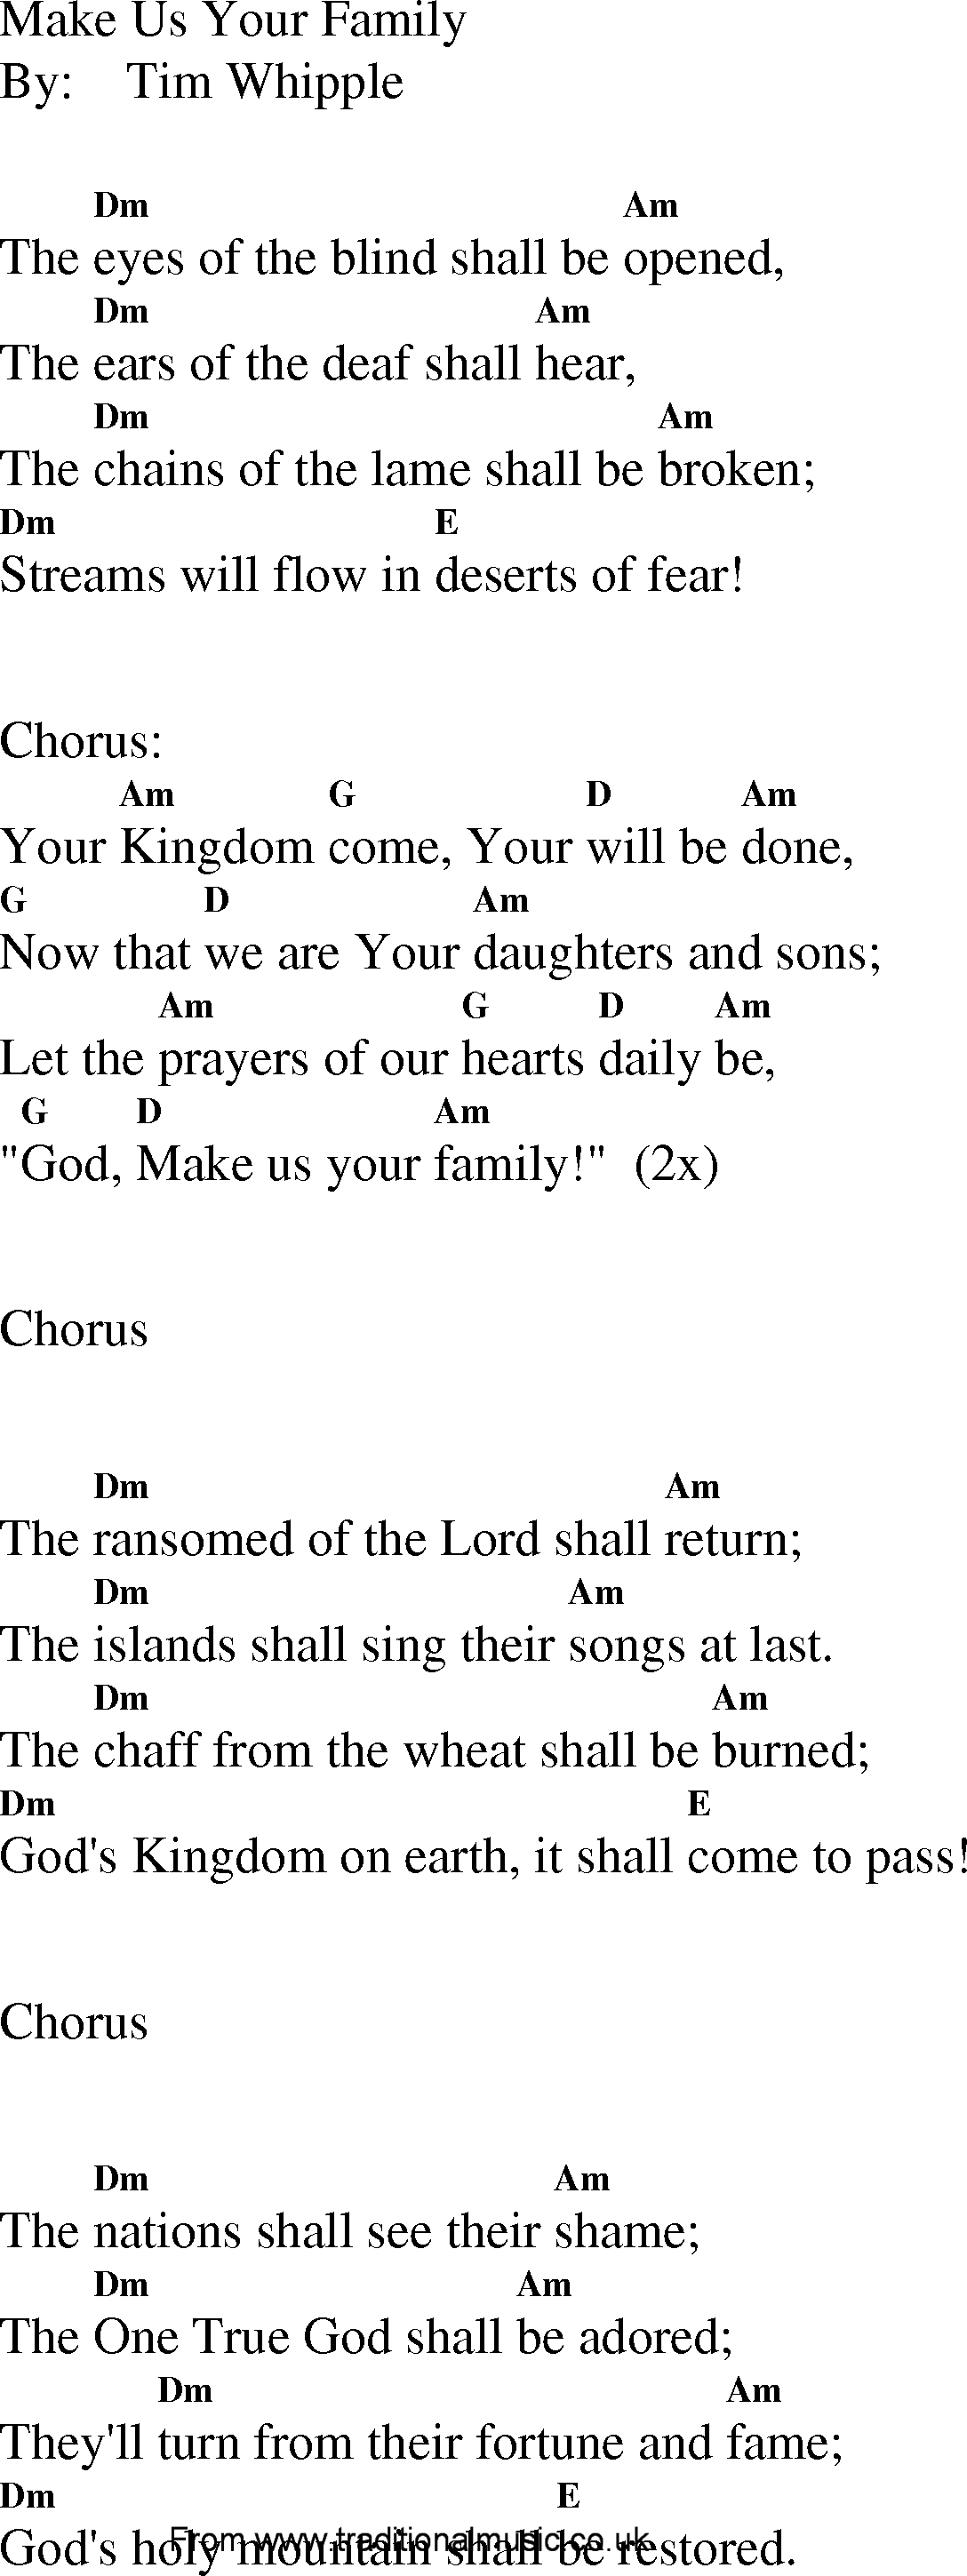 Gospel Song: make_us_your_family, lyrics and chords.